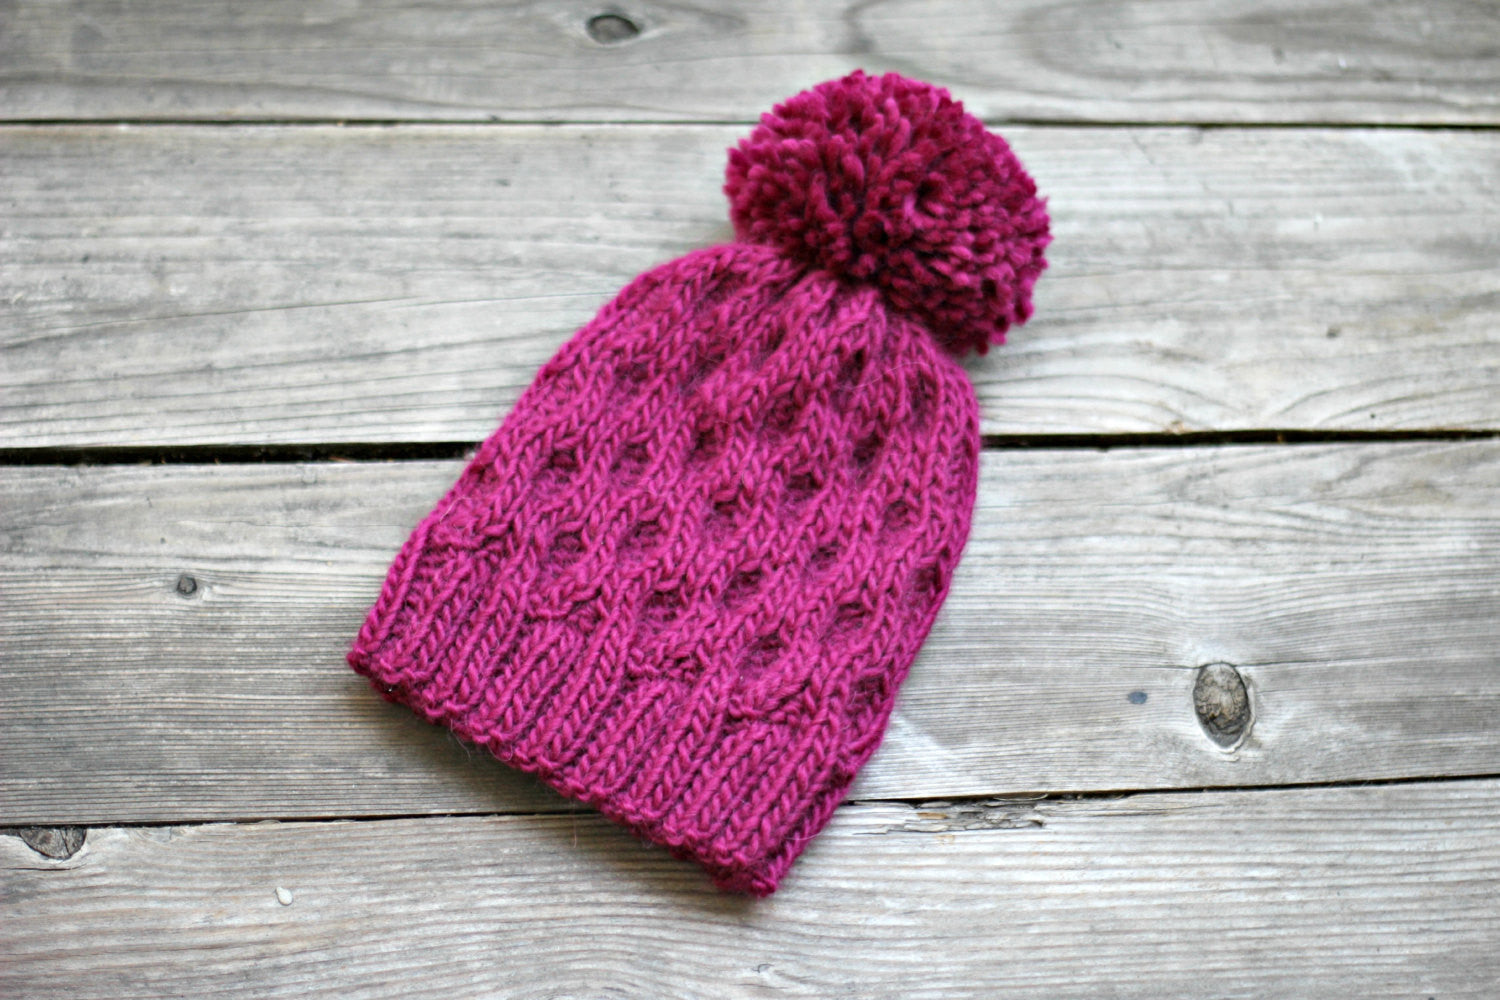 Pink knitted hat